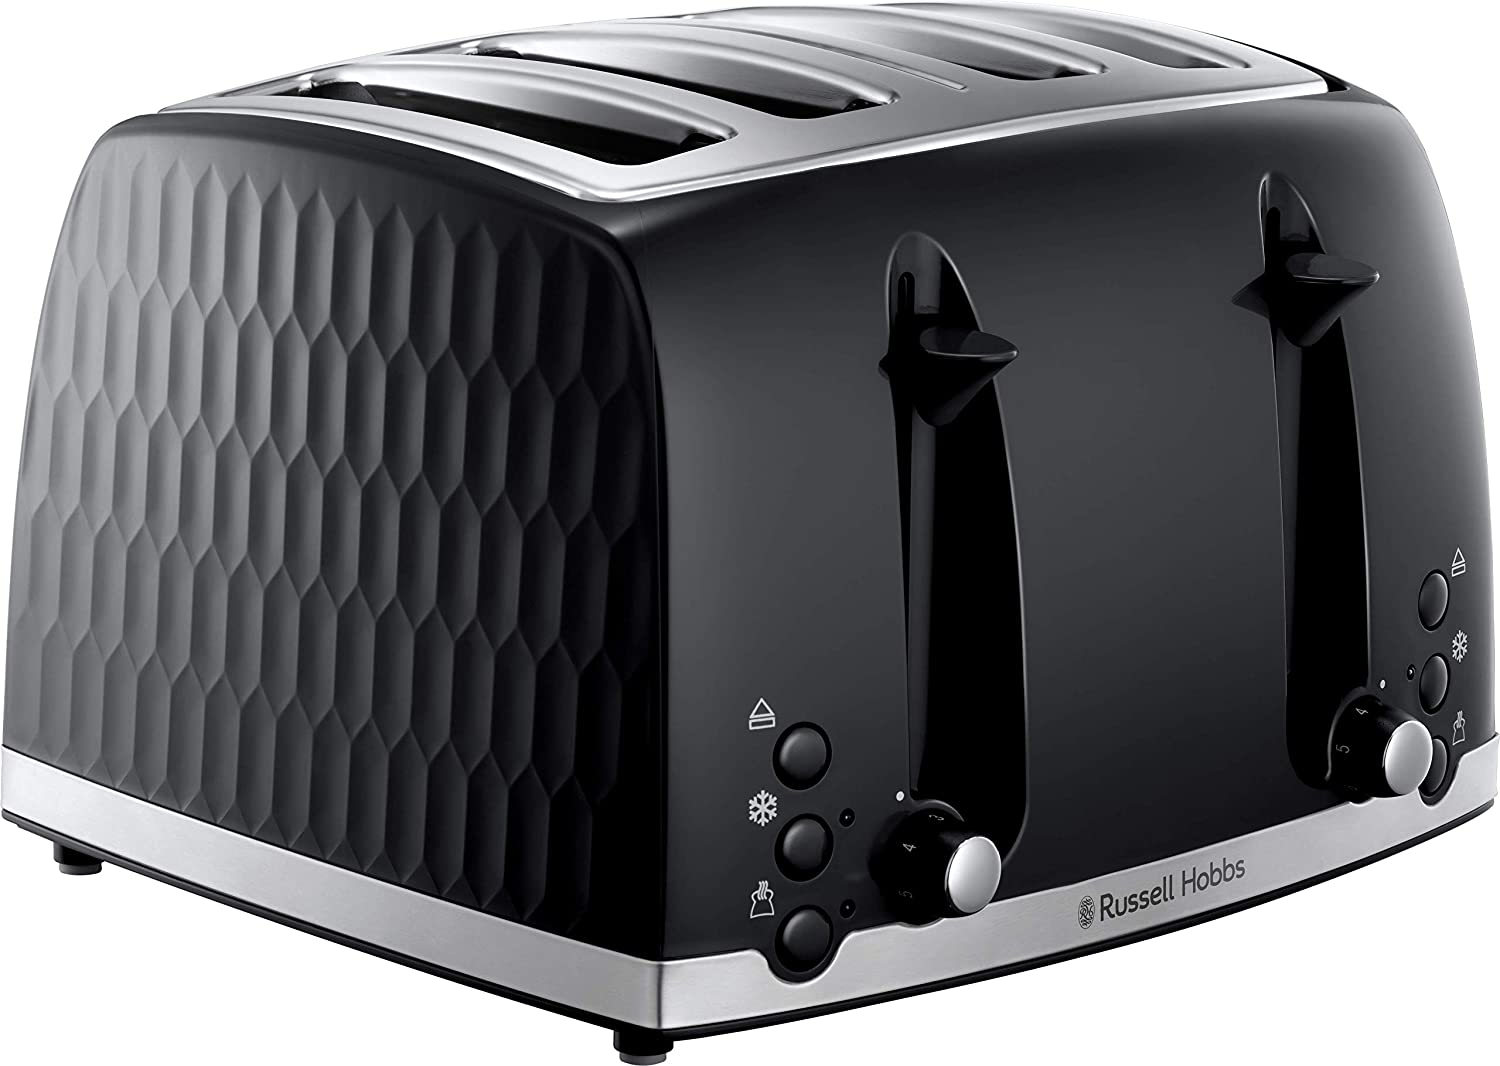 Russell Hobbs Modern Honeycomb 4 Slice Toaster Black 26071 with Extra Wide Slits and High Lift Function